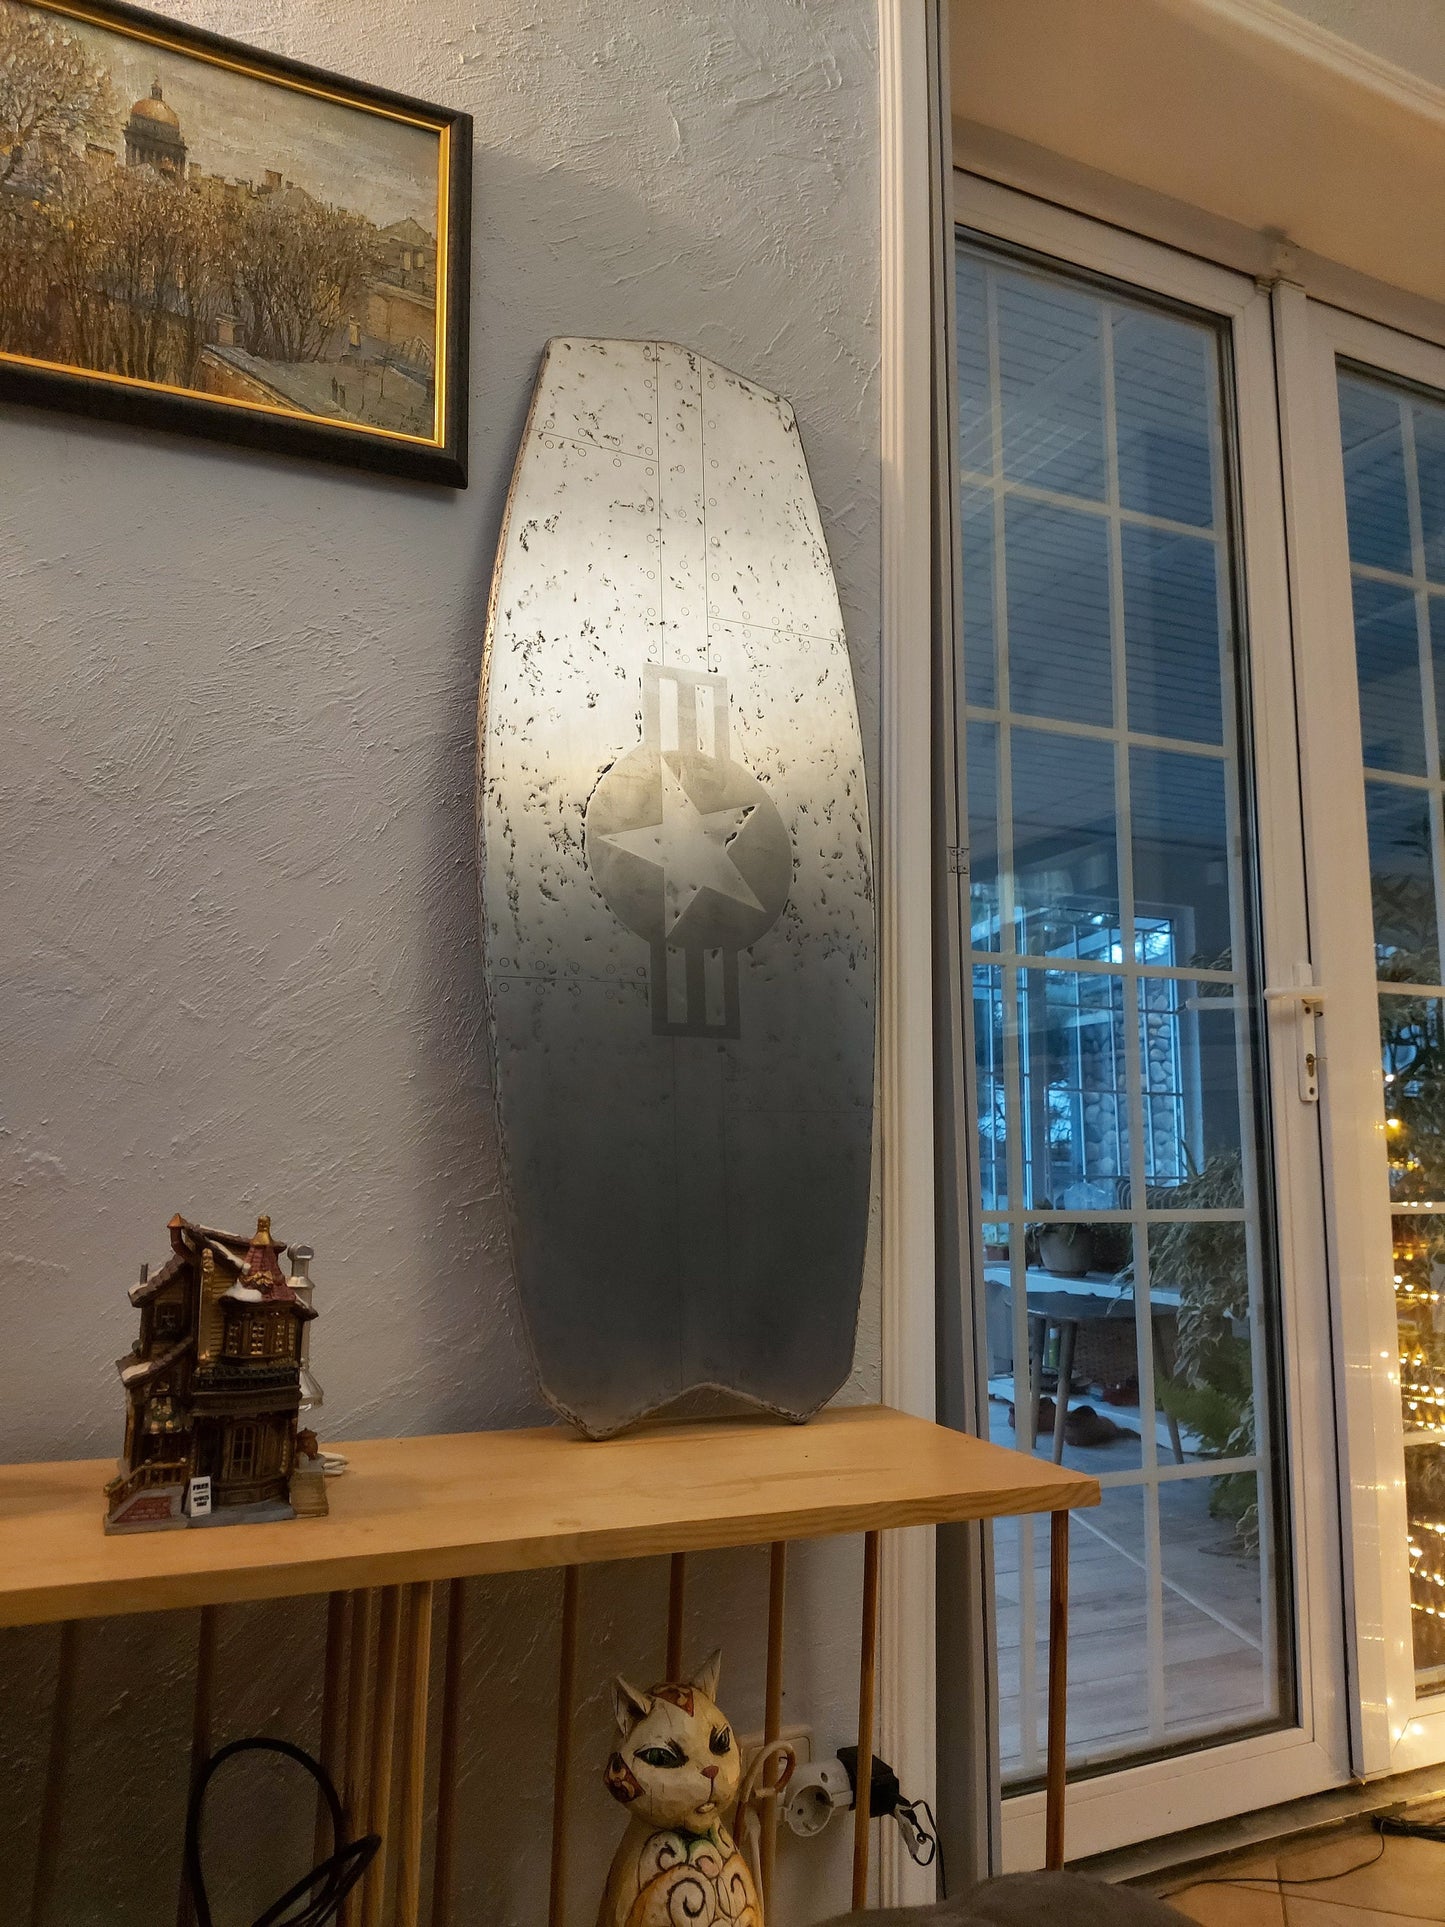 Steampunk-Inspired Kiteboard Table with Star and Rivets Pattern